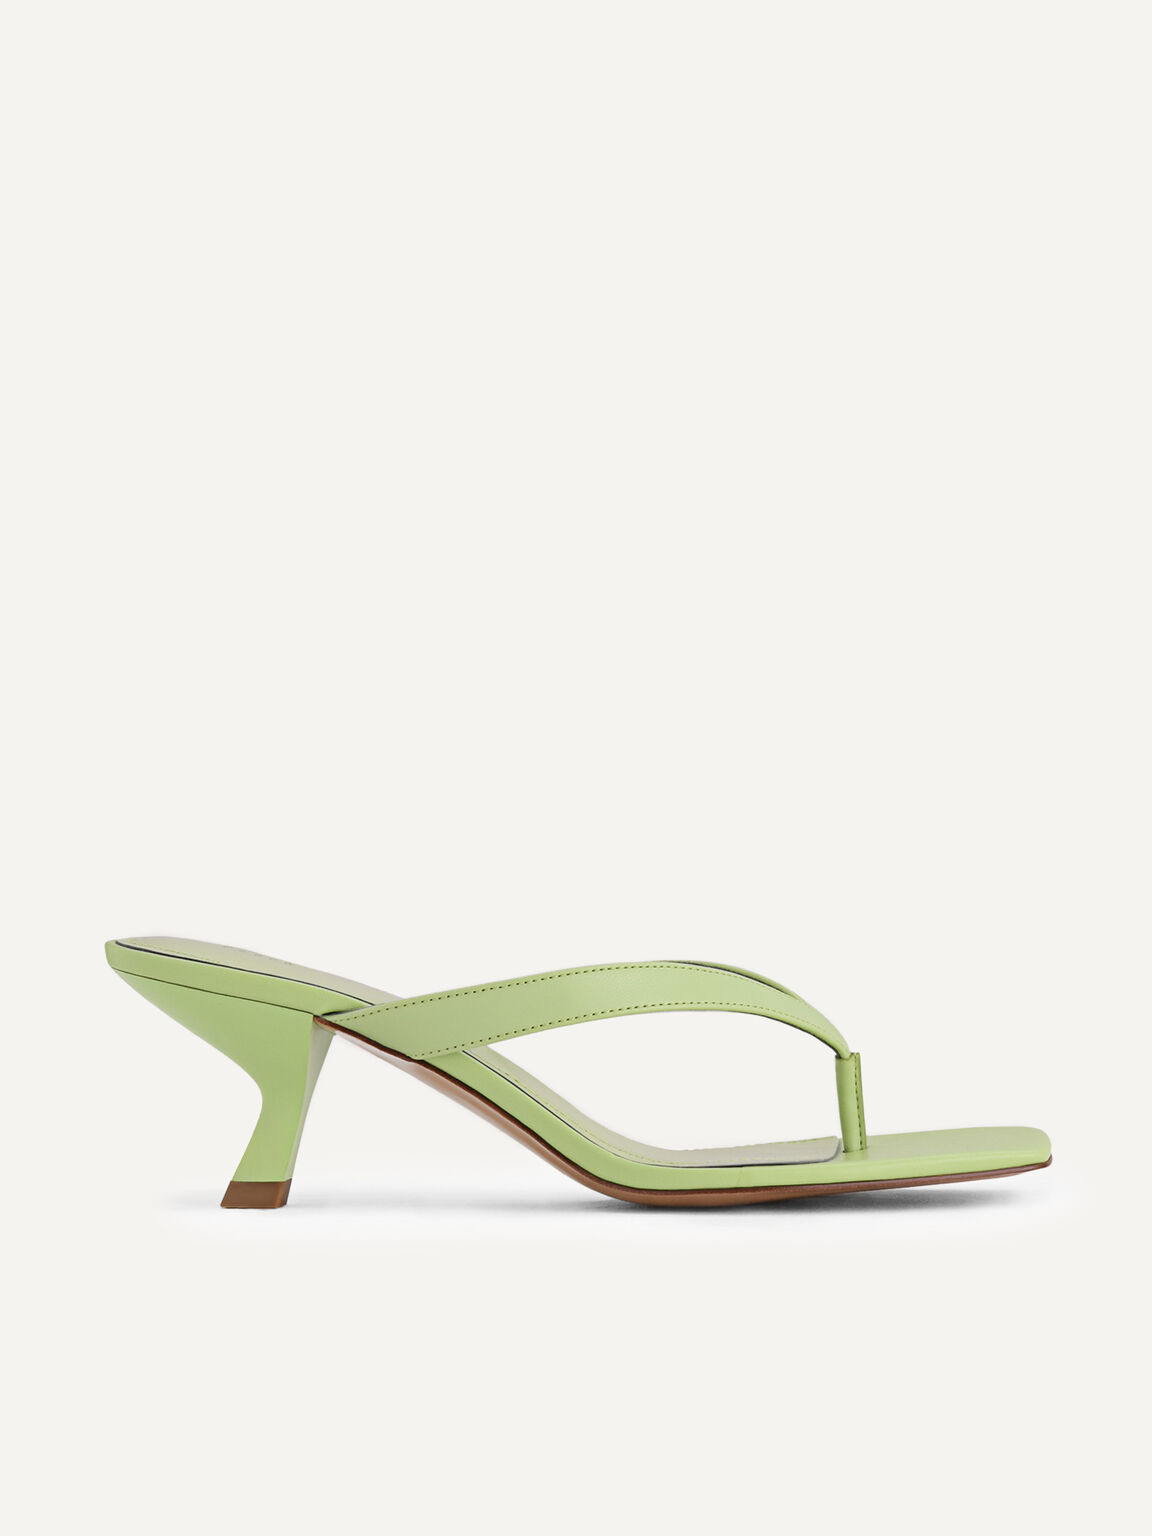 Square Toe Thong Heeled Sandals, Light Green